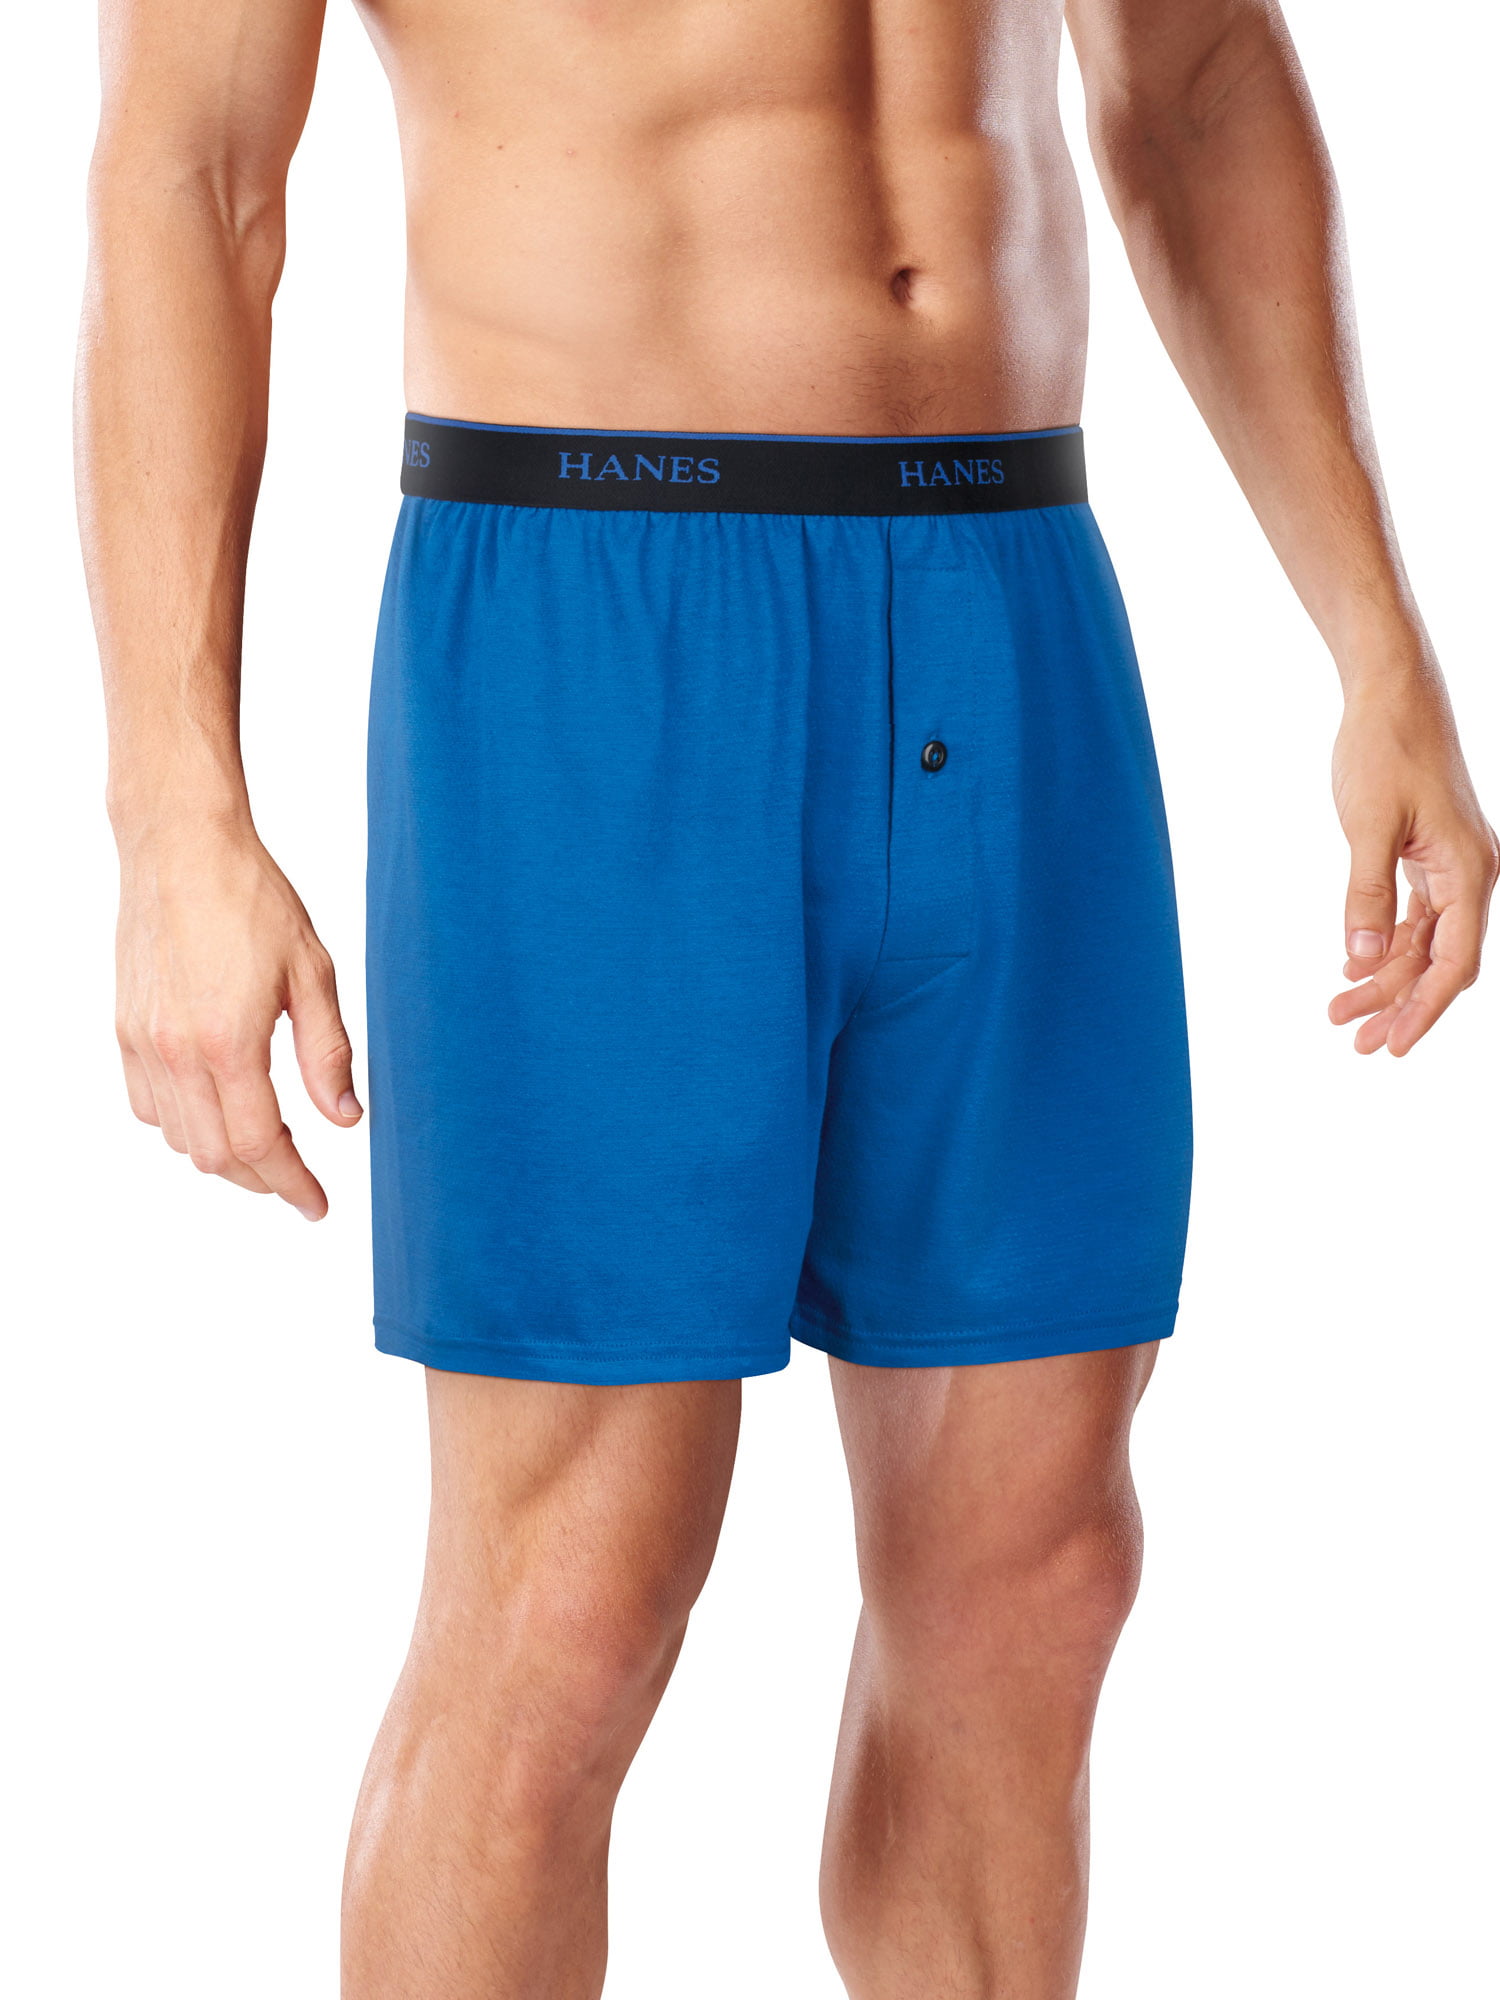 AND 1 Men's Knit Boxers, 6-Pack, Sizes S-3XL 